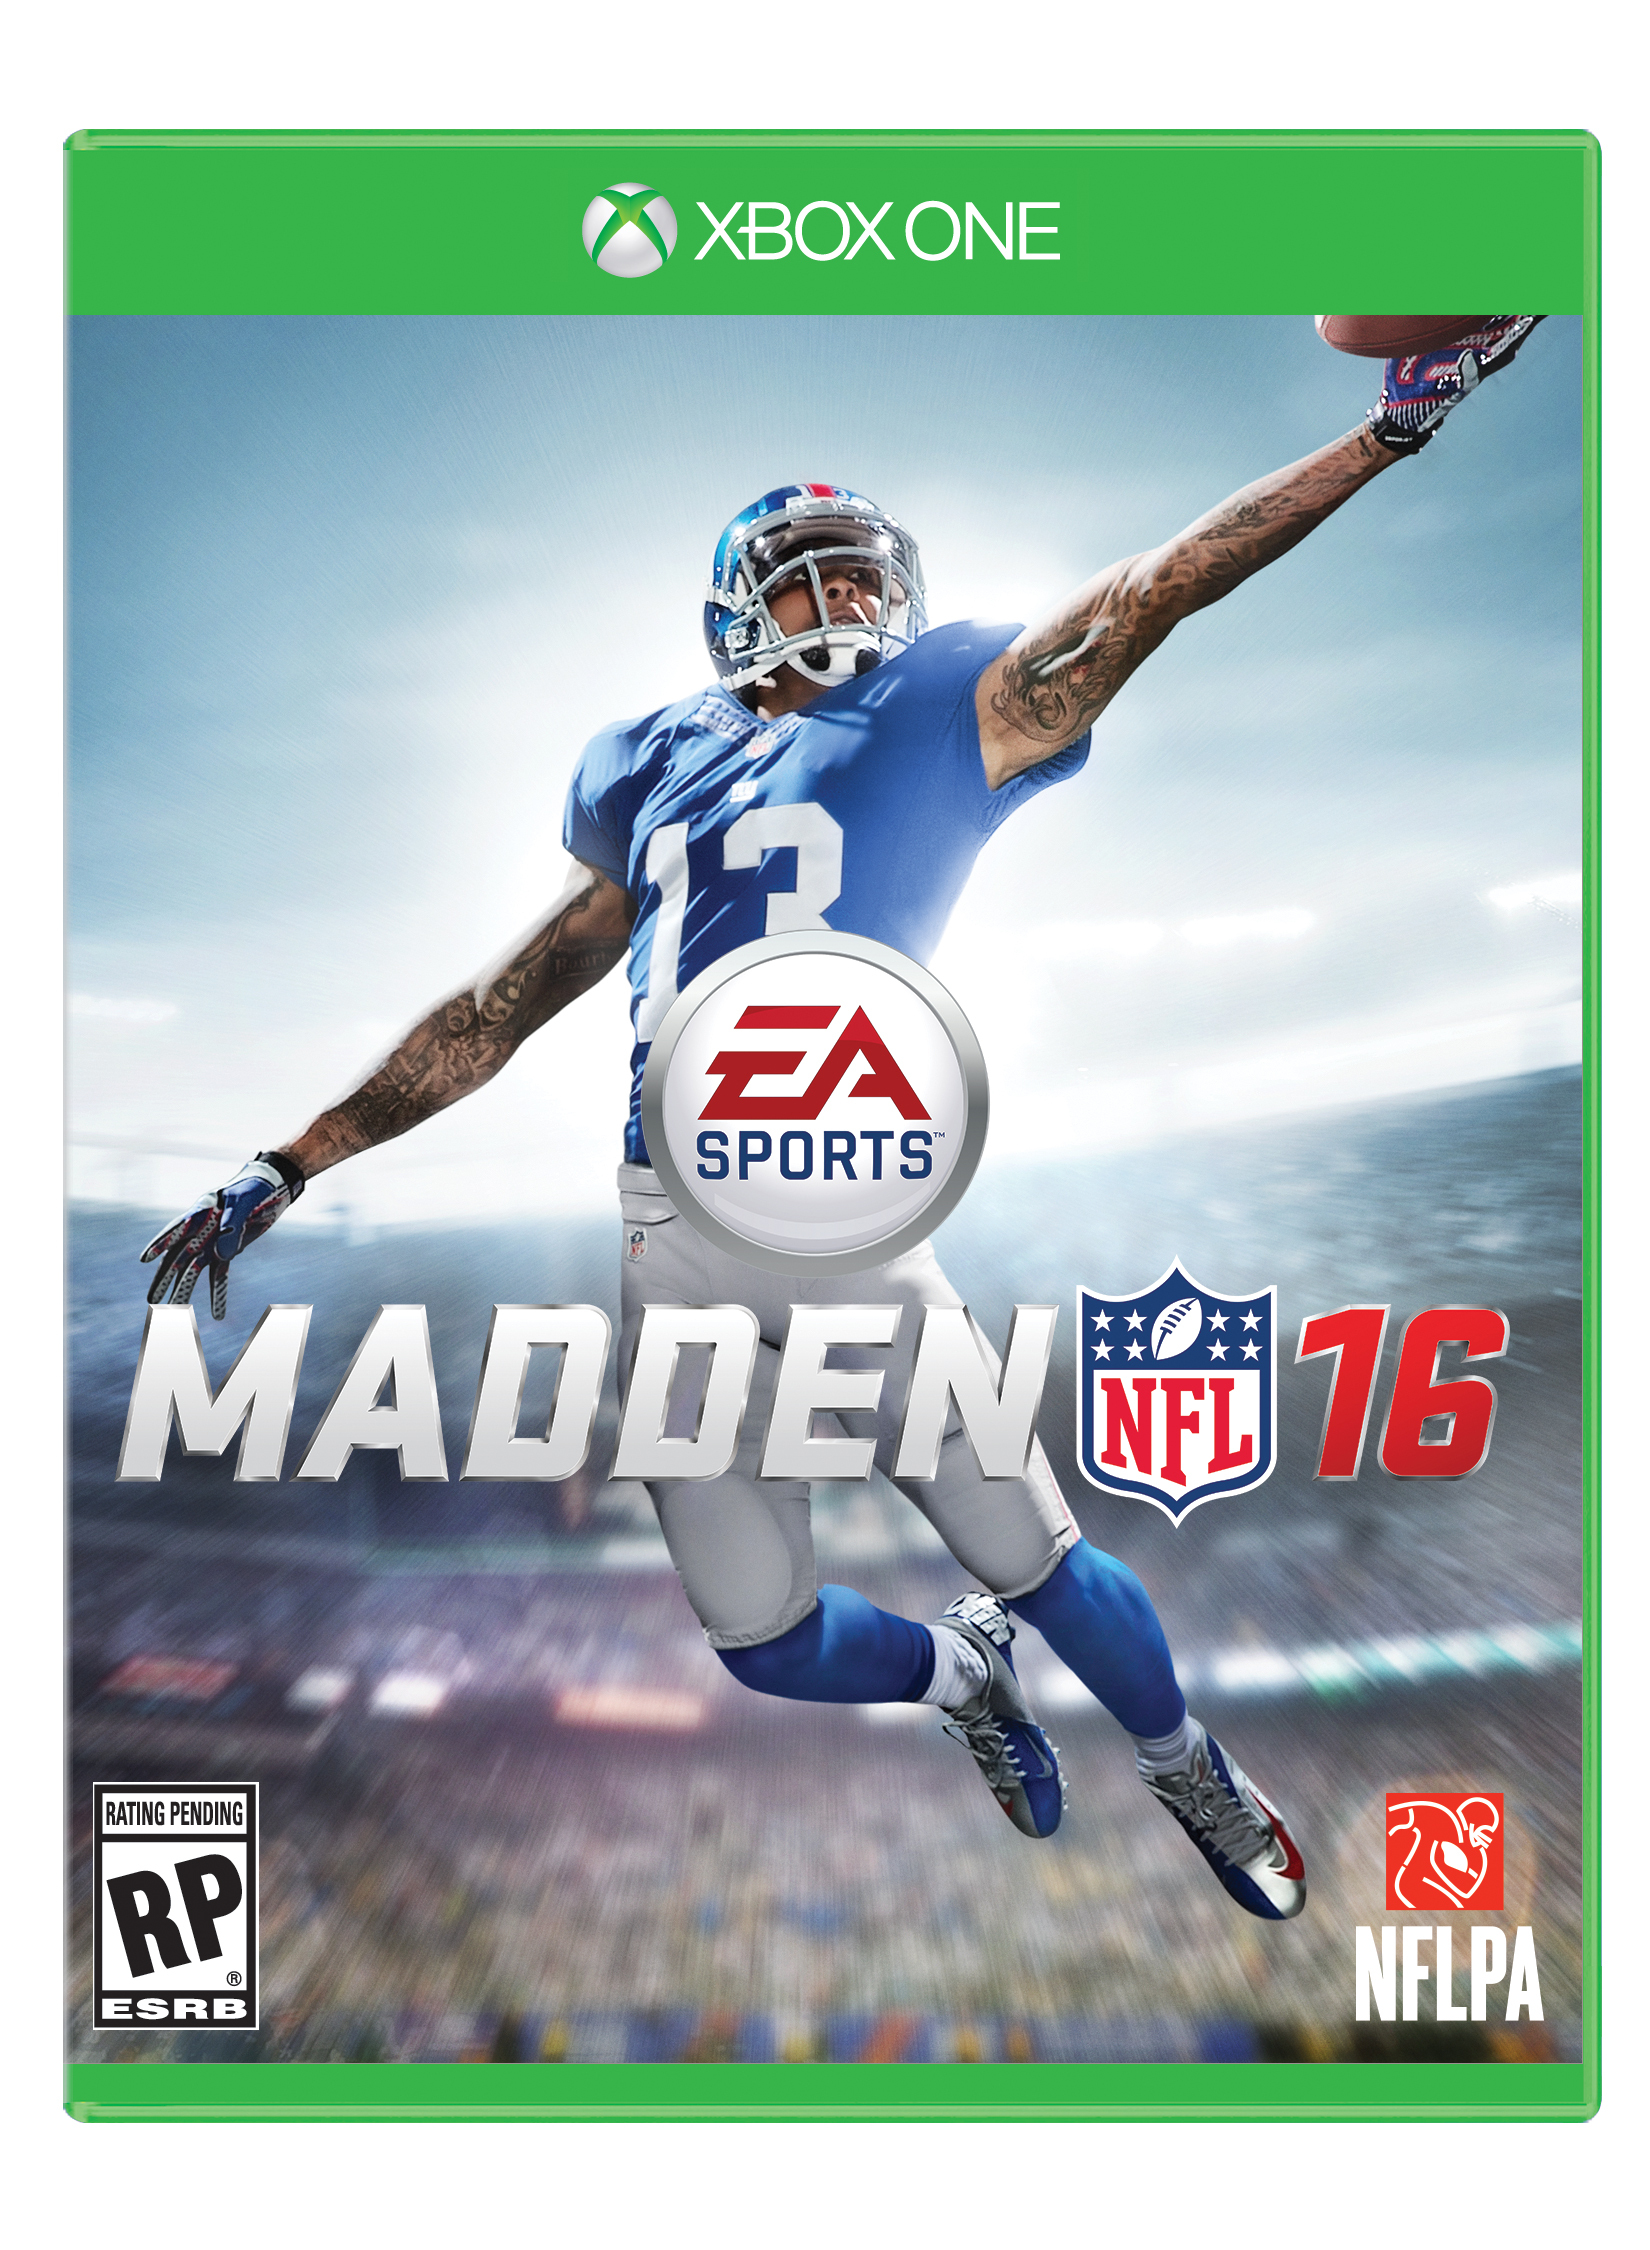 Odell Beckham Jr. Claims Victory in Madden NFL 16 Cover Vote